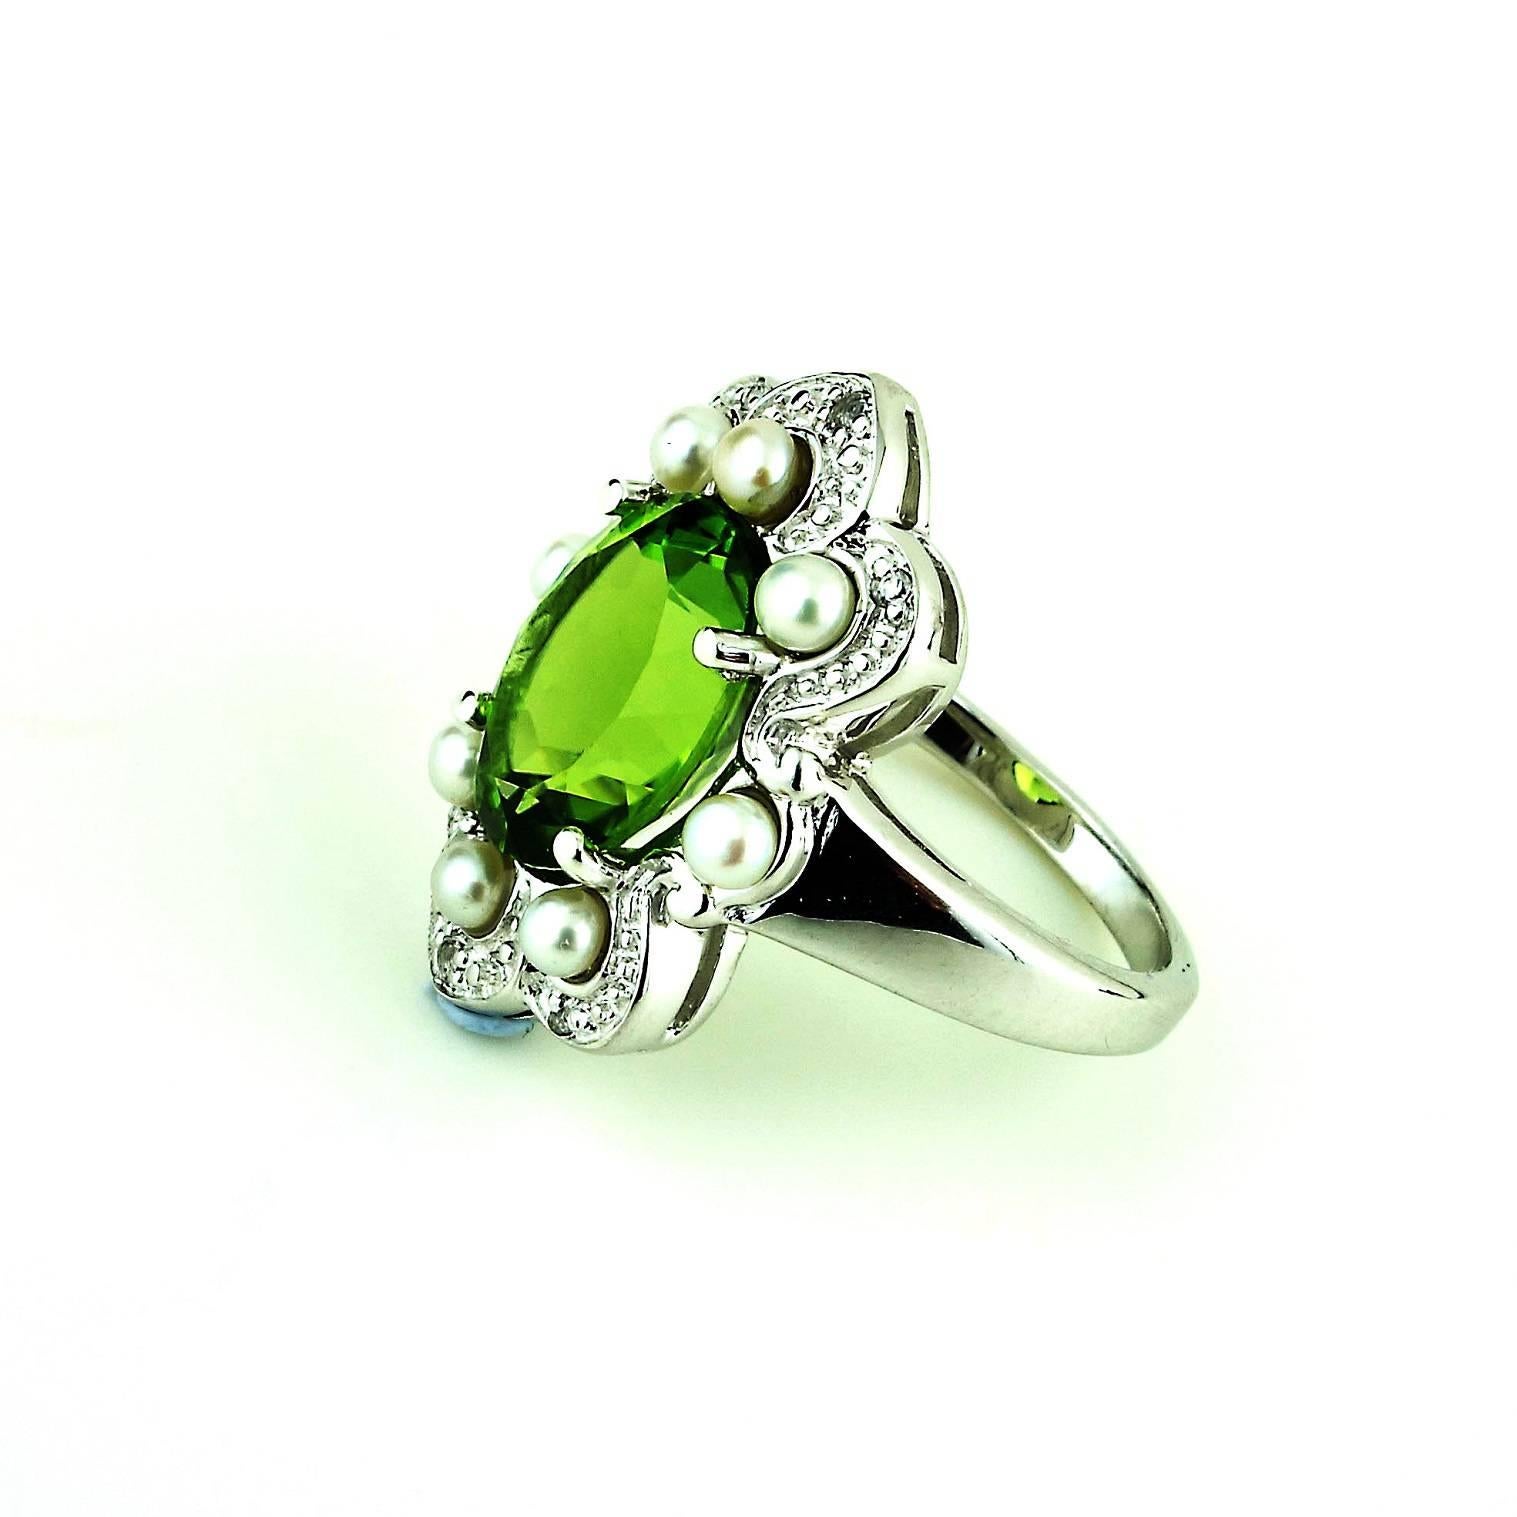 Romantic, unique, flashing oval Peridot, 5.40 cts, set in a rhodium over Sterling Silver ring.  The Peridot is nestled in a larger setting of eight freshwater pearls which are surrounded by sparkling white topaz. It is just under an inch in length. 